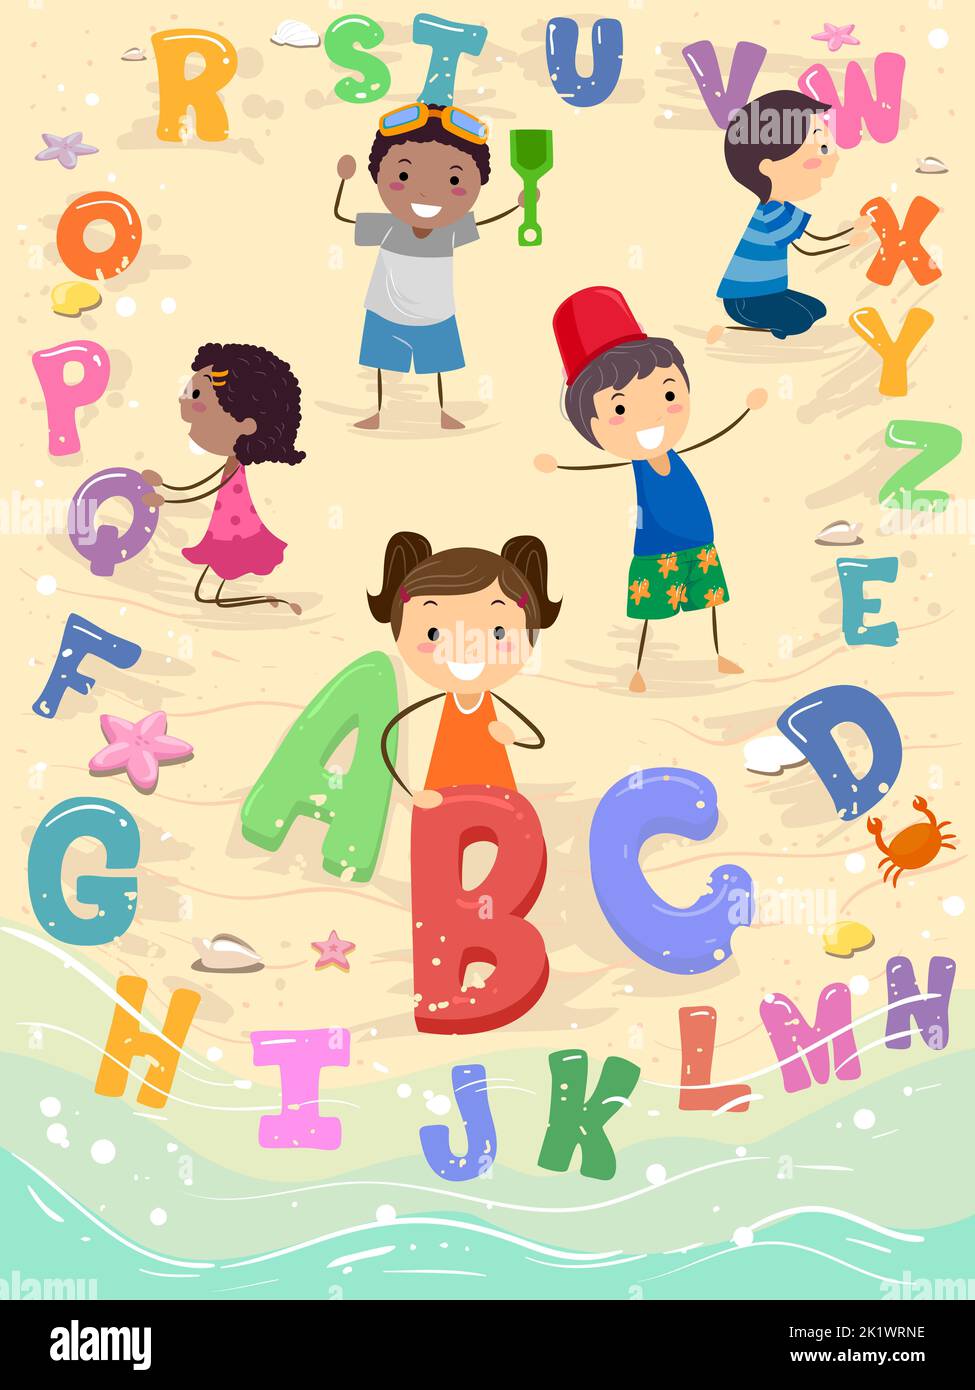 Illustration of Stickman Kids Playing with the Alphabet by the Beach Stock Photo